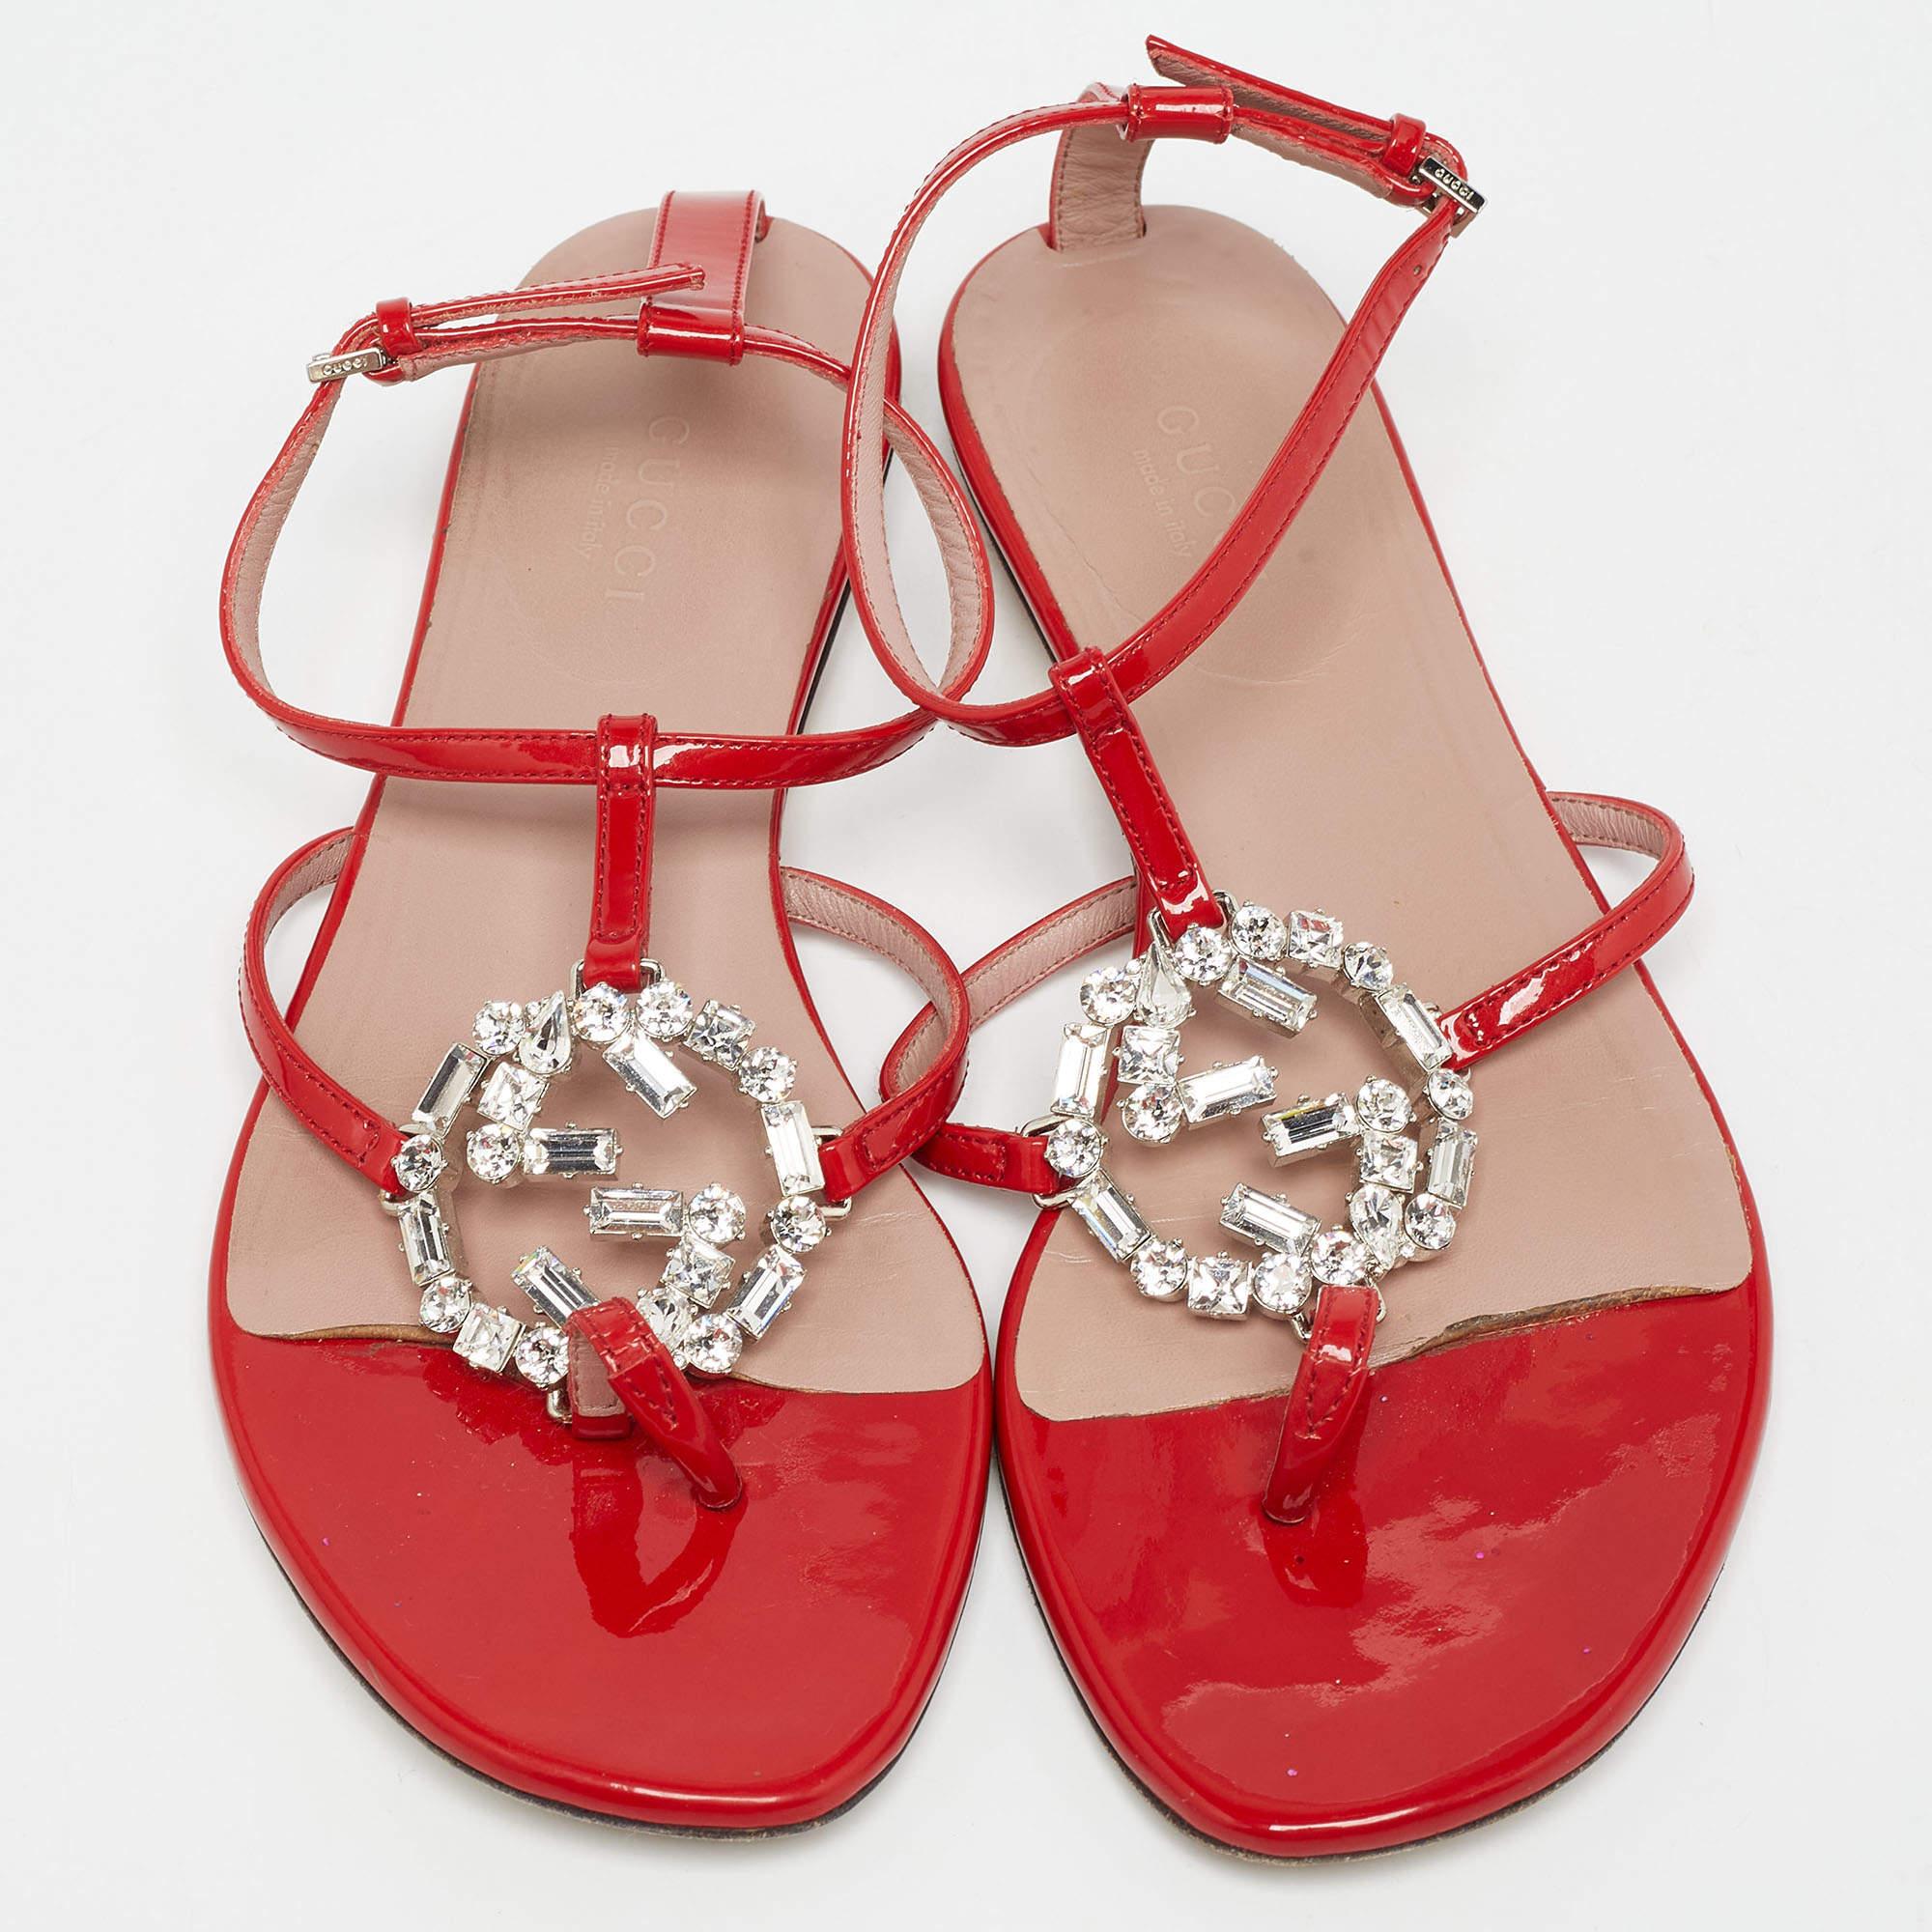 Gucci Red Patent GG Interlocking Crystal Embellished Ankle Strap Size 36 In Fair Condition For Sale In Dubai, Al Qouz 2